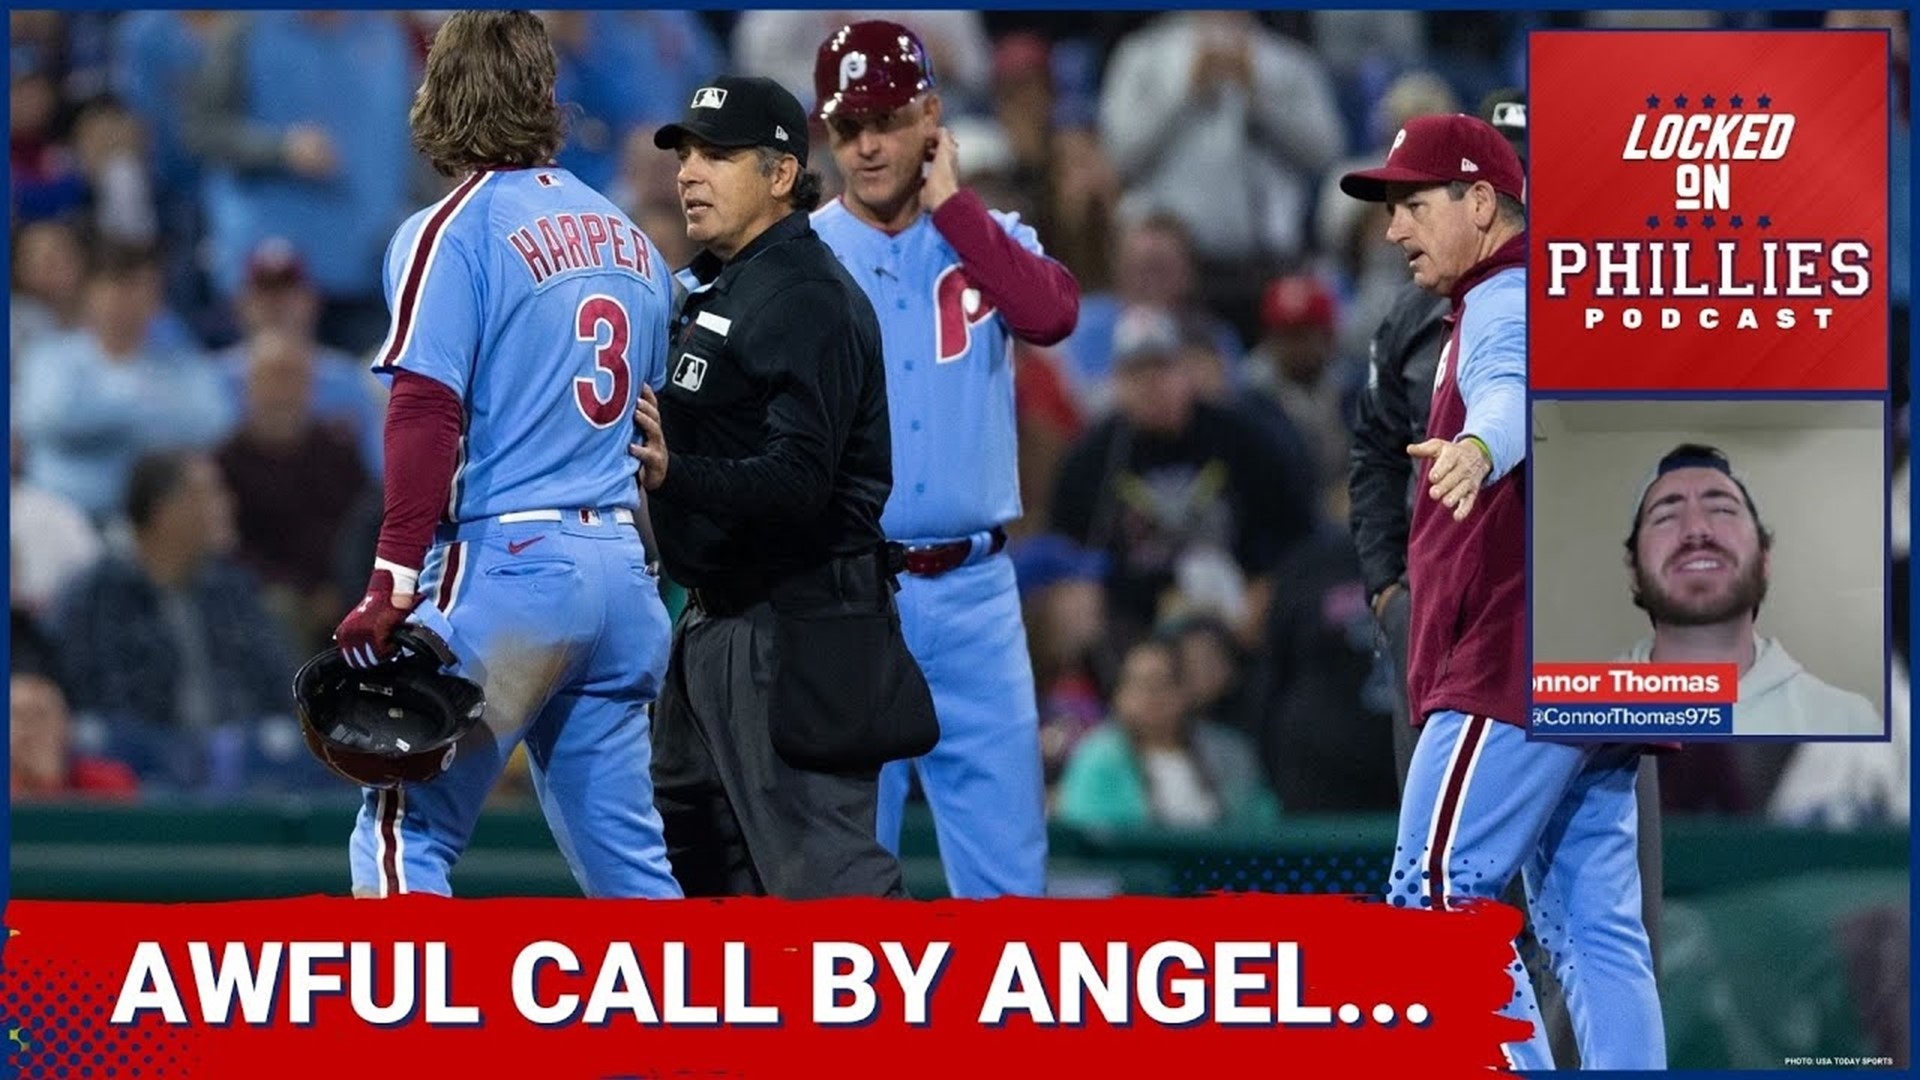 MLB Ump Angel Hernandez: 5 Fast Facts You Need to Know